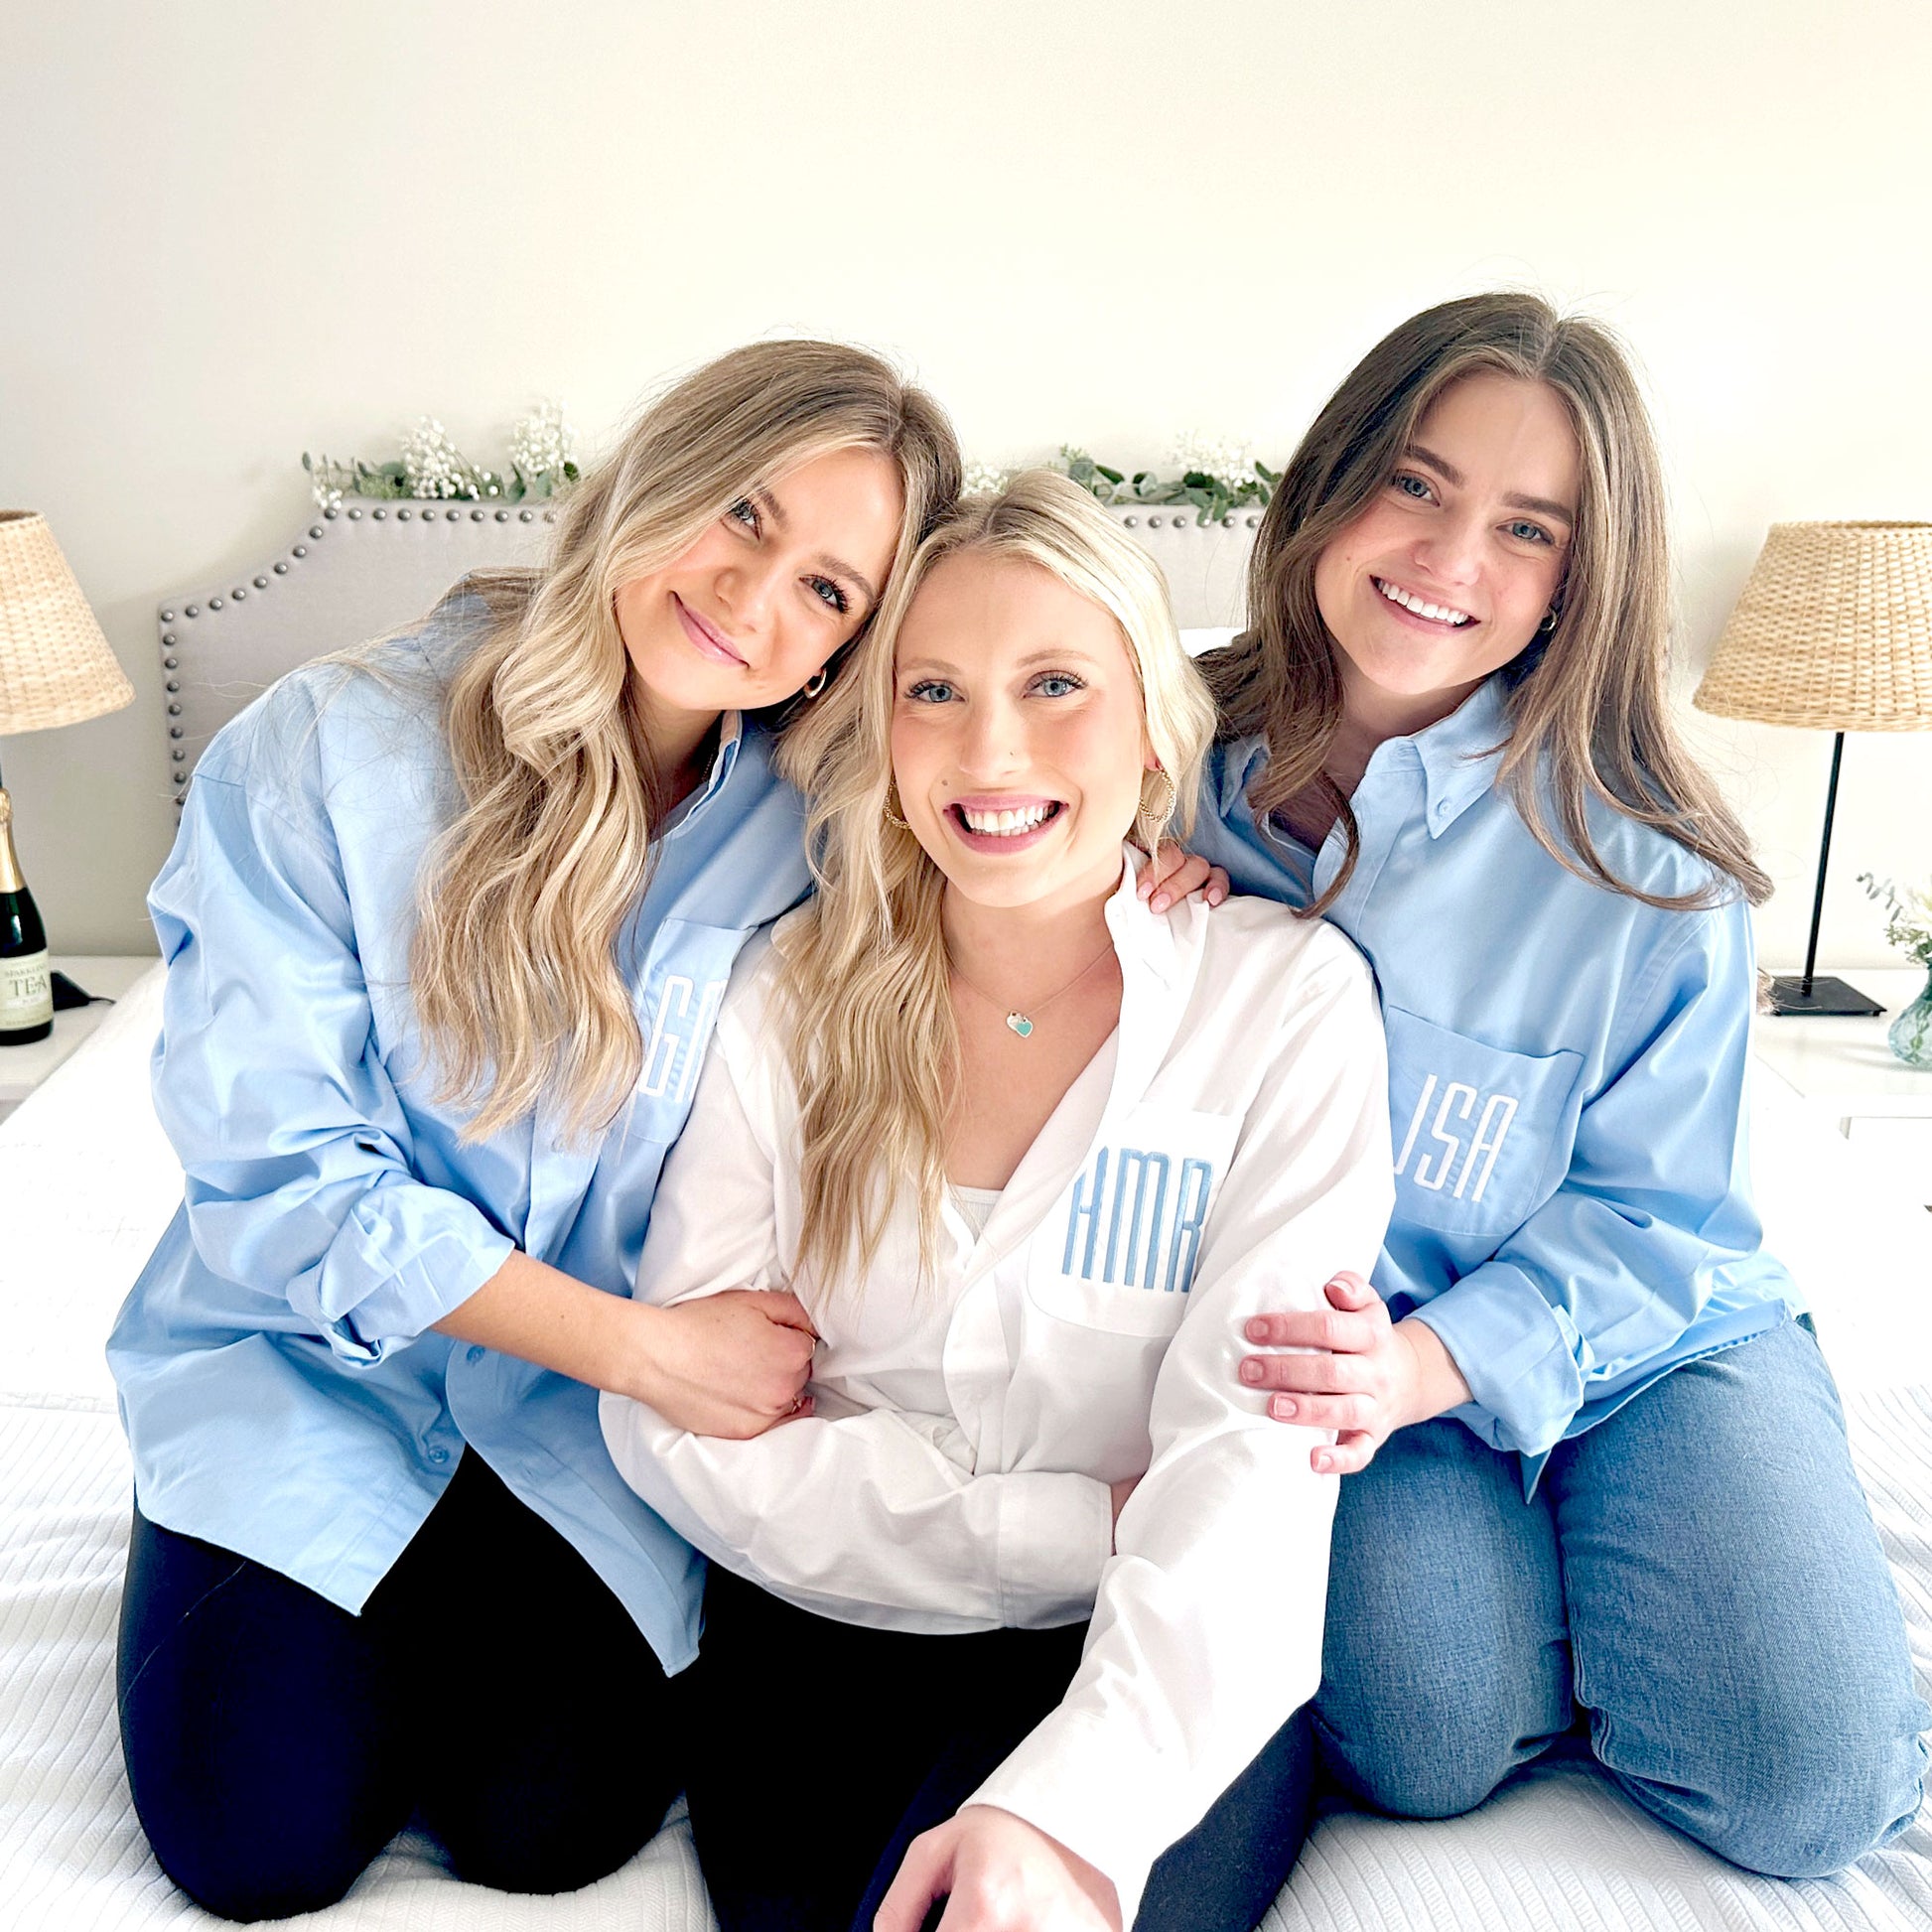 bride and 2 bridesmaids modeling white and light blue button down shirts with font 18 moogram embroidered on the left chest pocket in white and baby blue threads